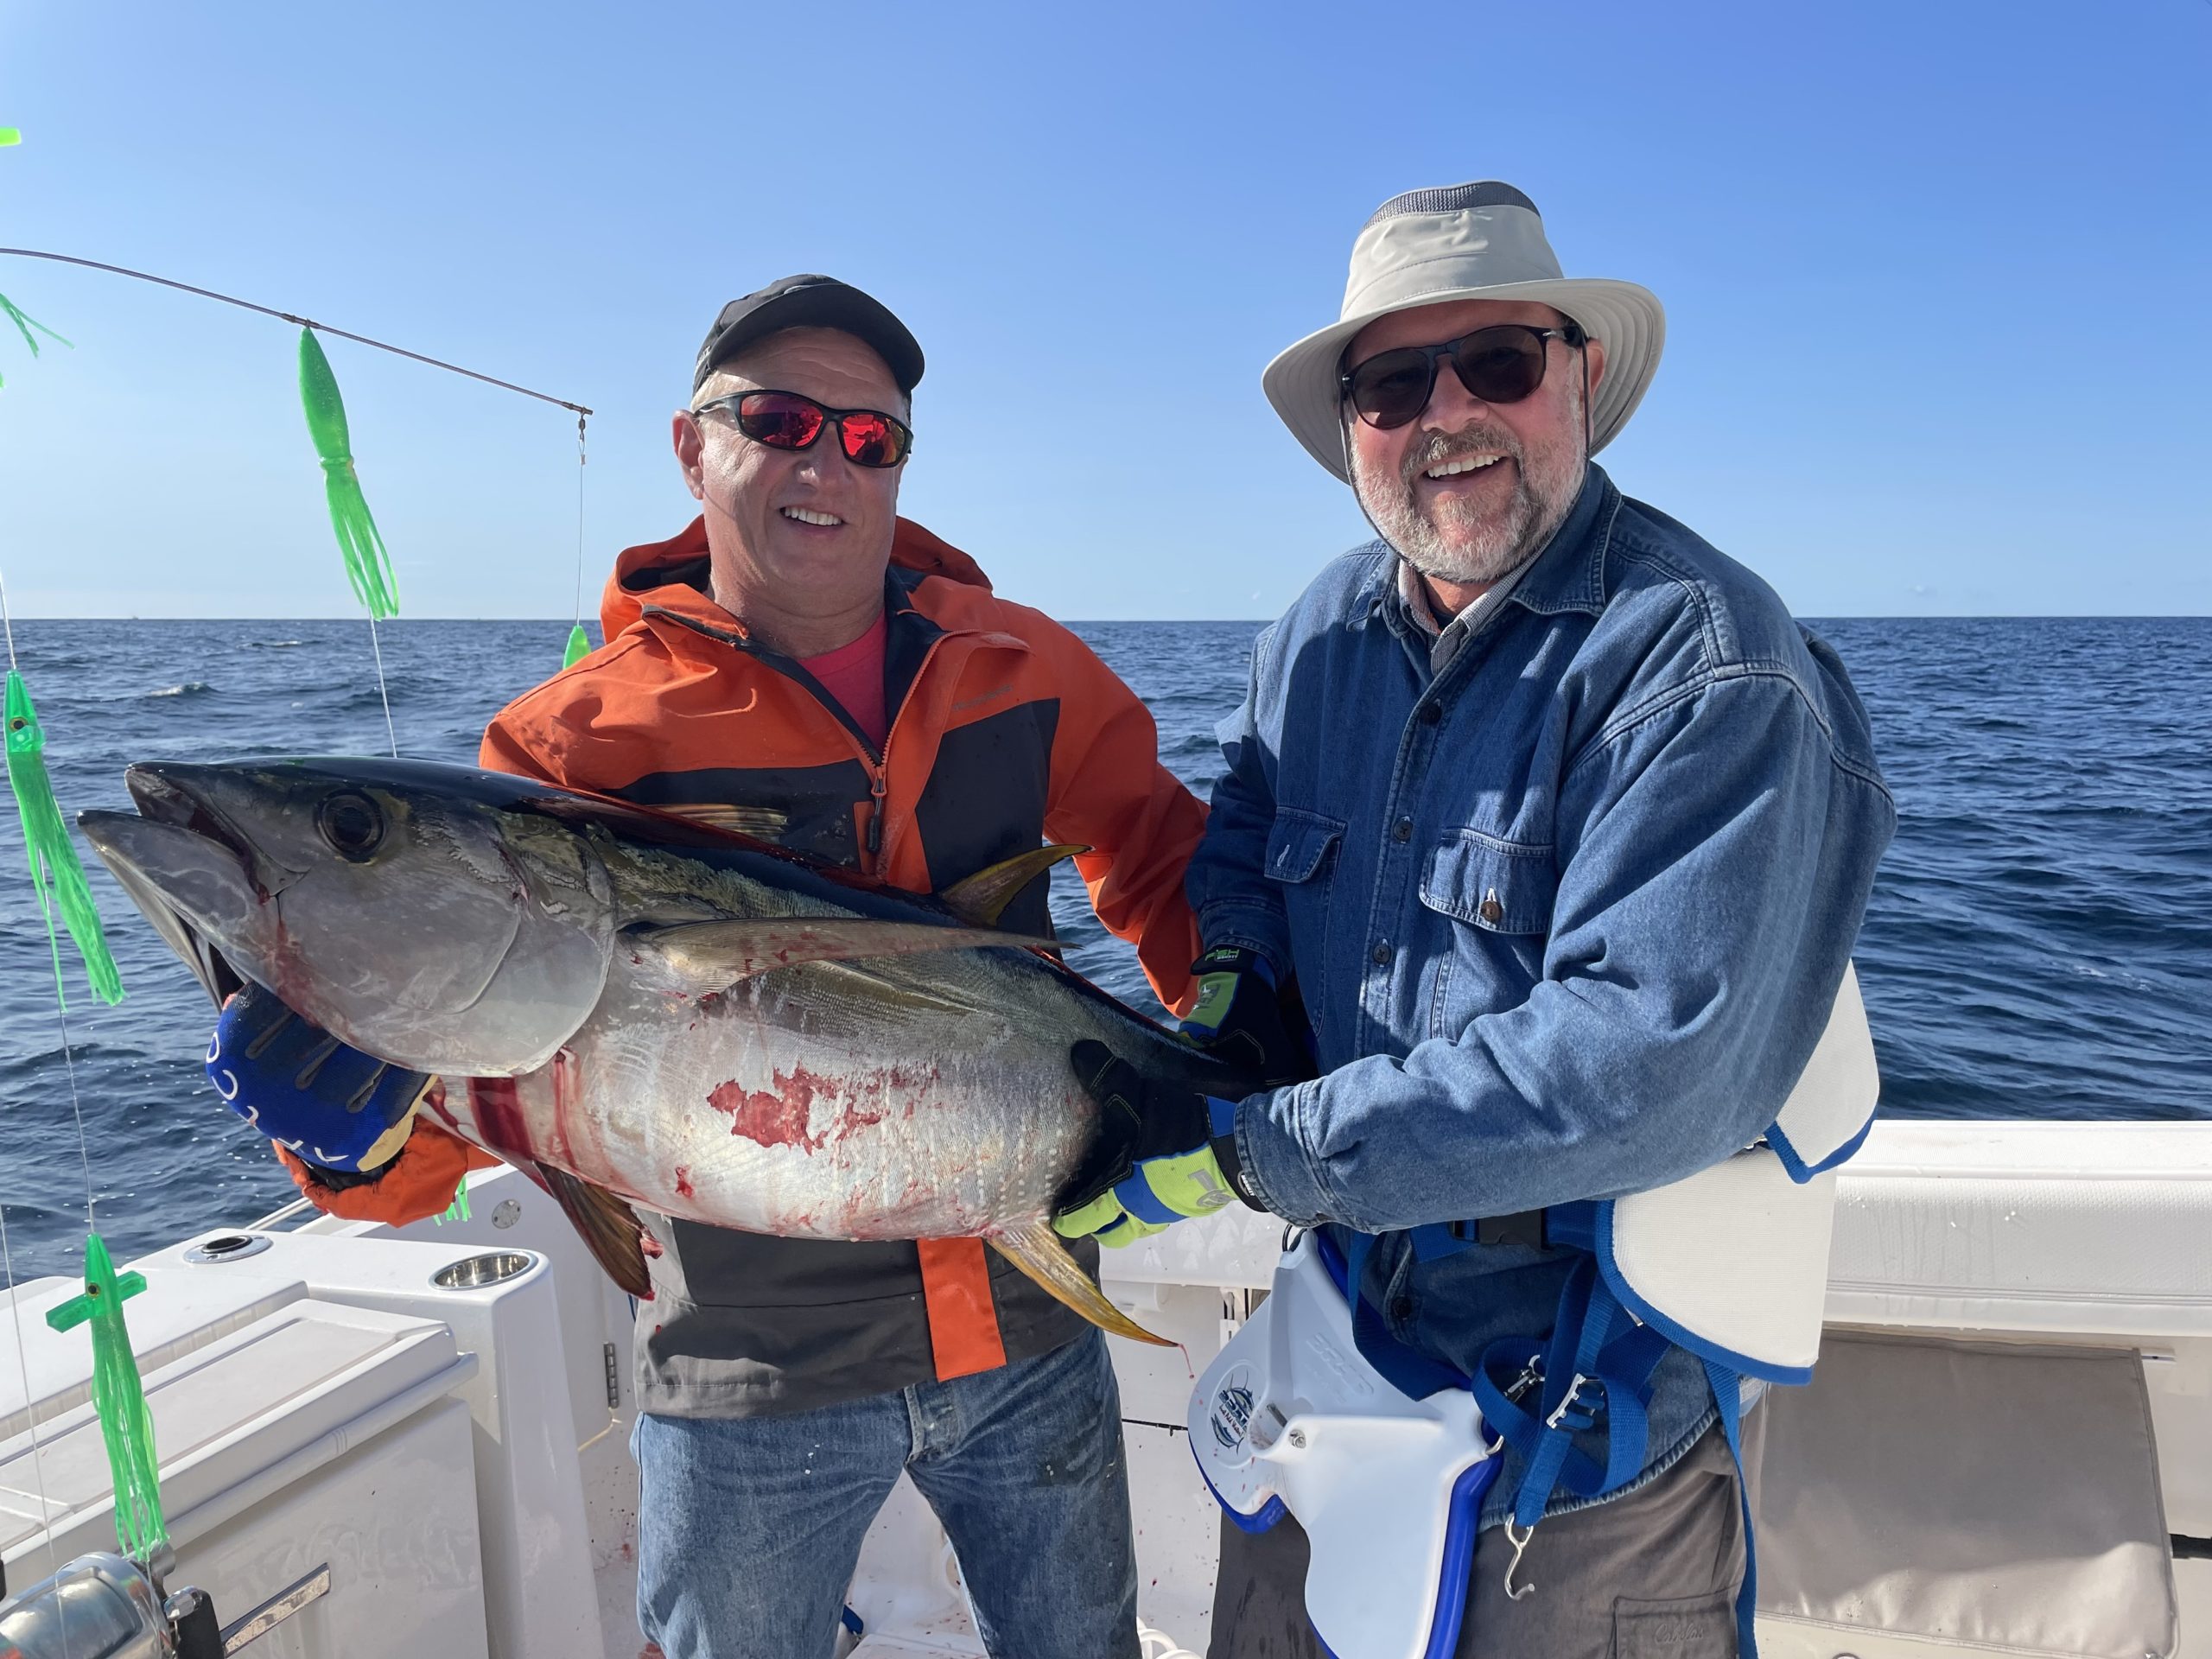 Drew Lanzetta and Ken Renkens with a nice inshore yellowfin caught out of Shinnecock Inlet.